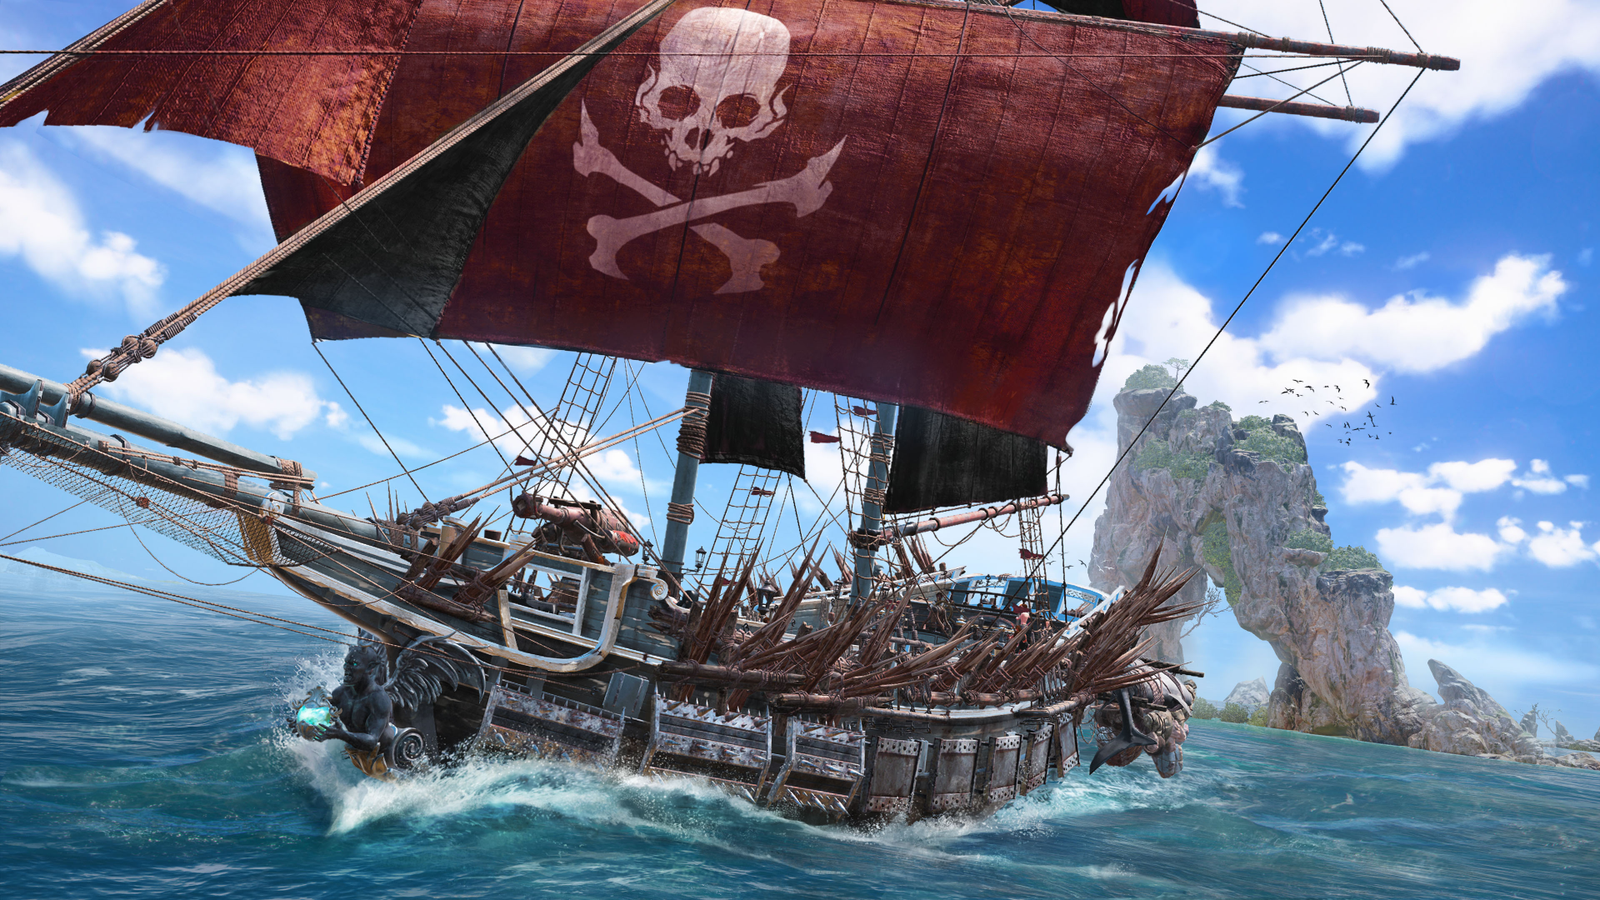 Skull & Bones Developers Talk About Pirate Stories and Show Screenshots